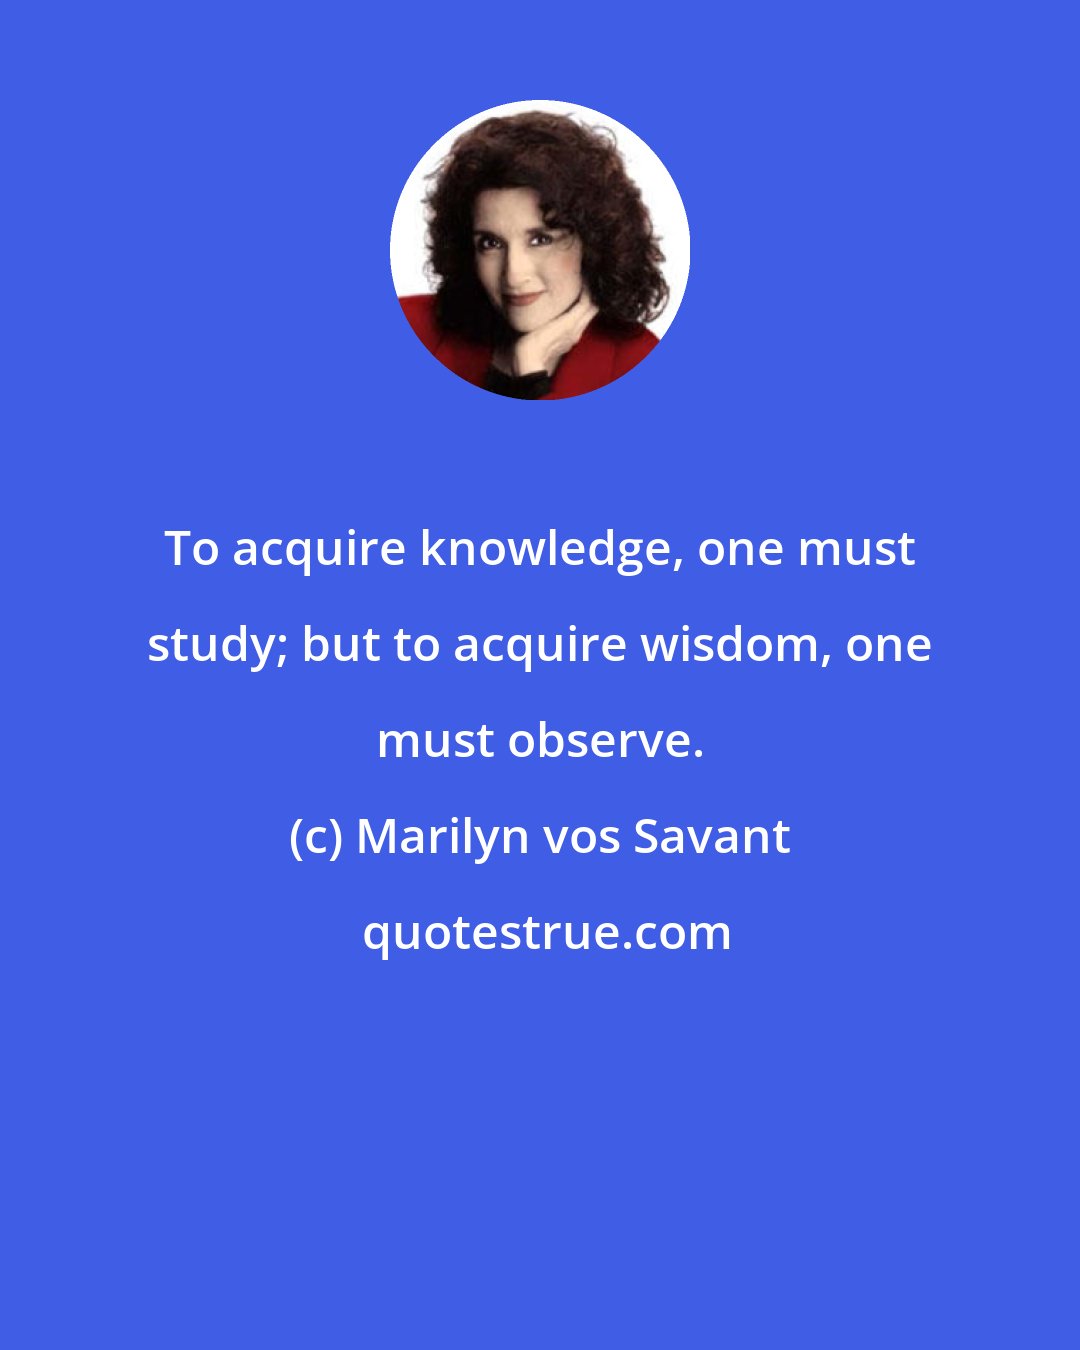 Marilyn vos Savant: To acquire knowledge, one must study; but to acquire wisdom, one must observe.